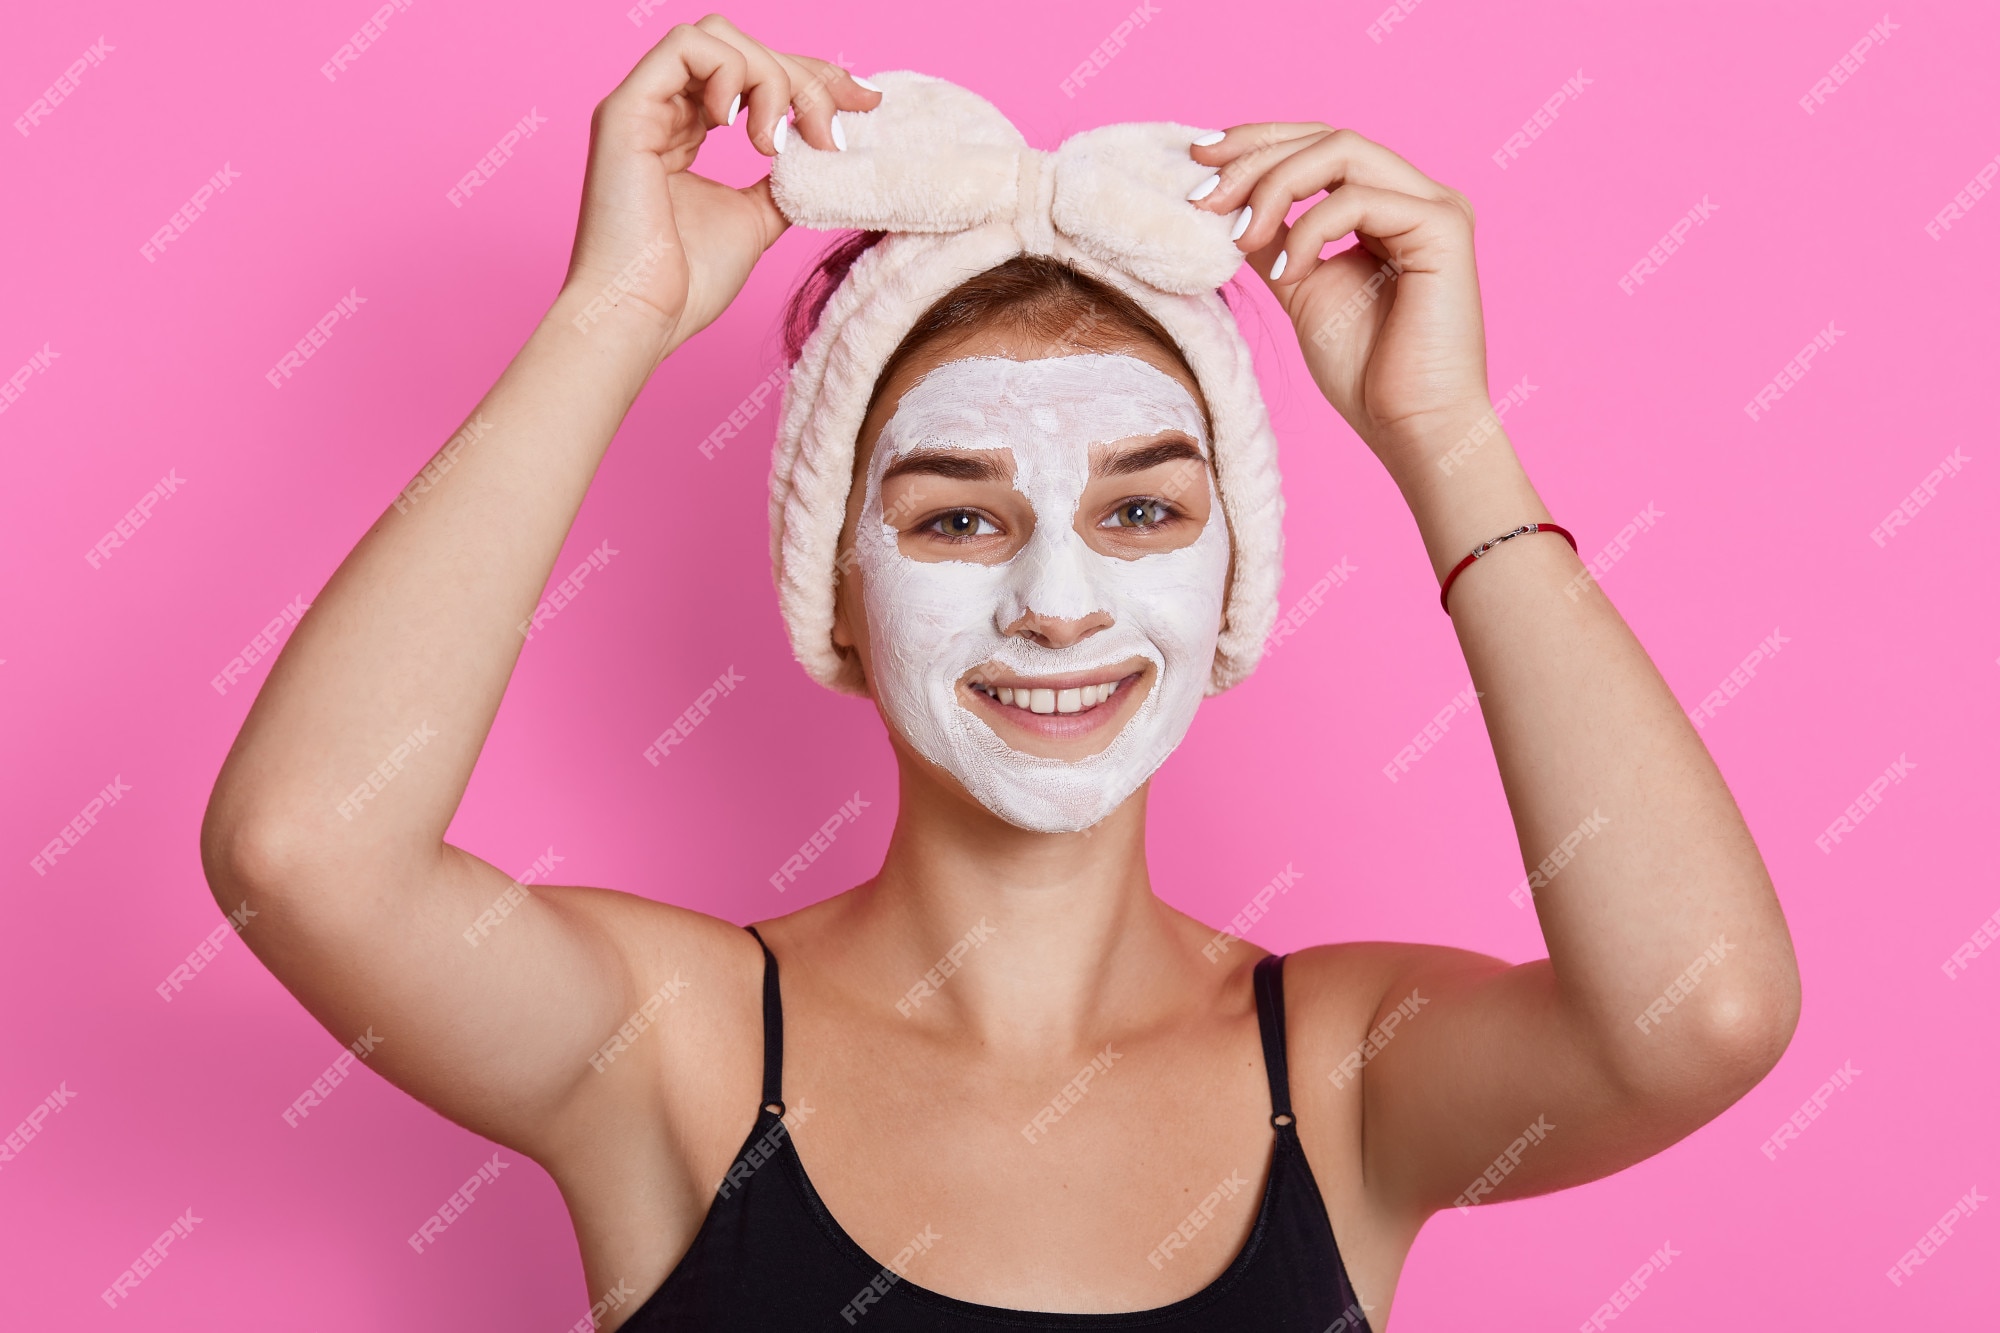 Premium Photo | Adorable funny woman with clay mask on her face and hair  band with bow on head touching her headband, has beauty procedures at home  in morning.